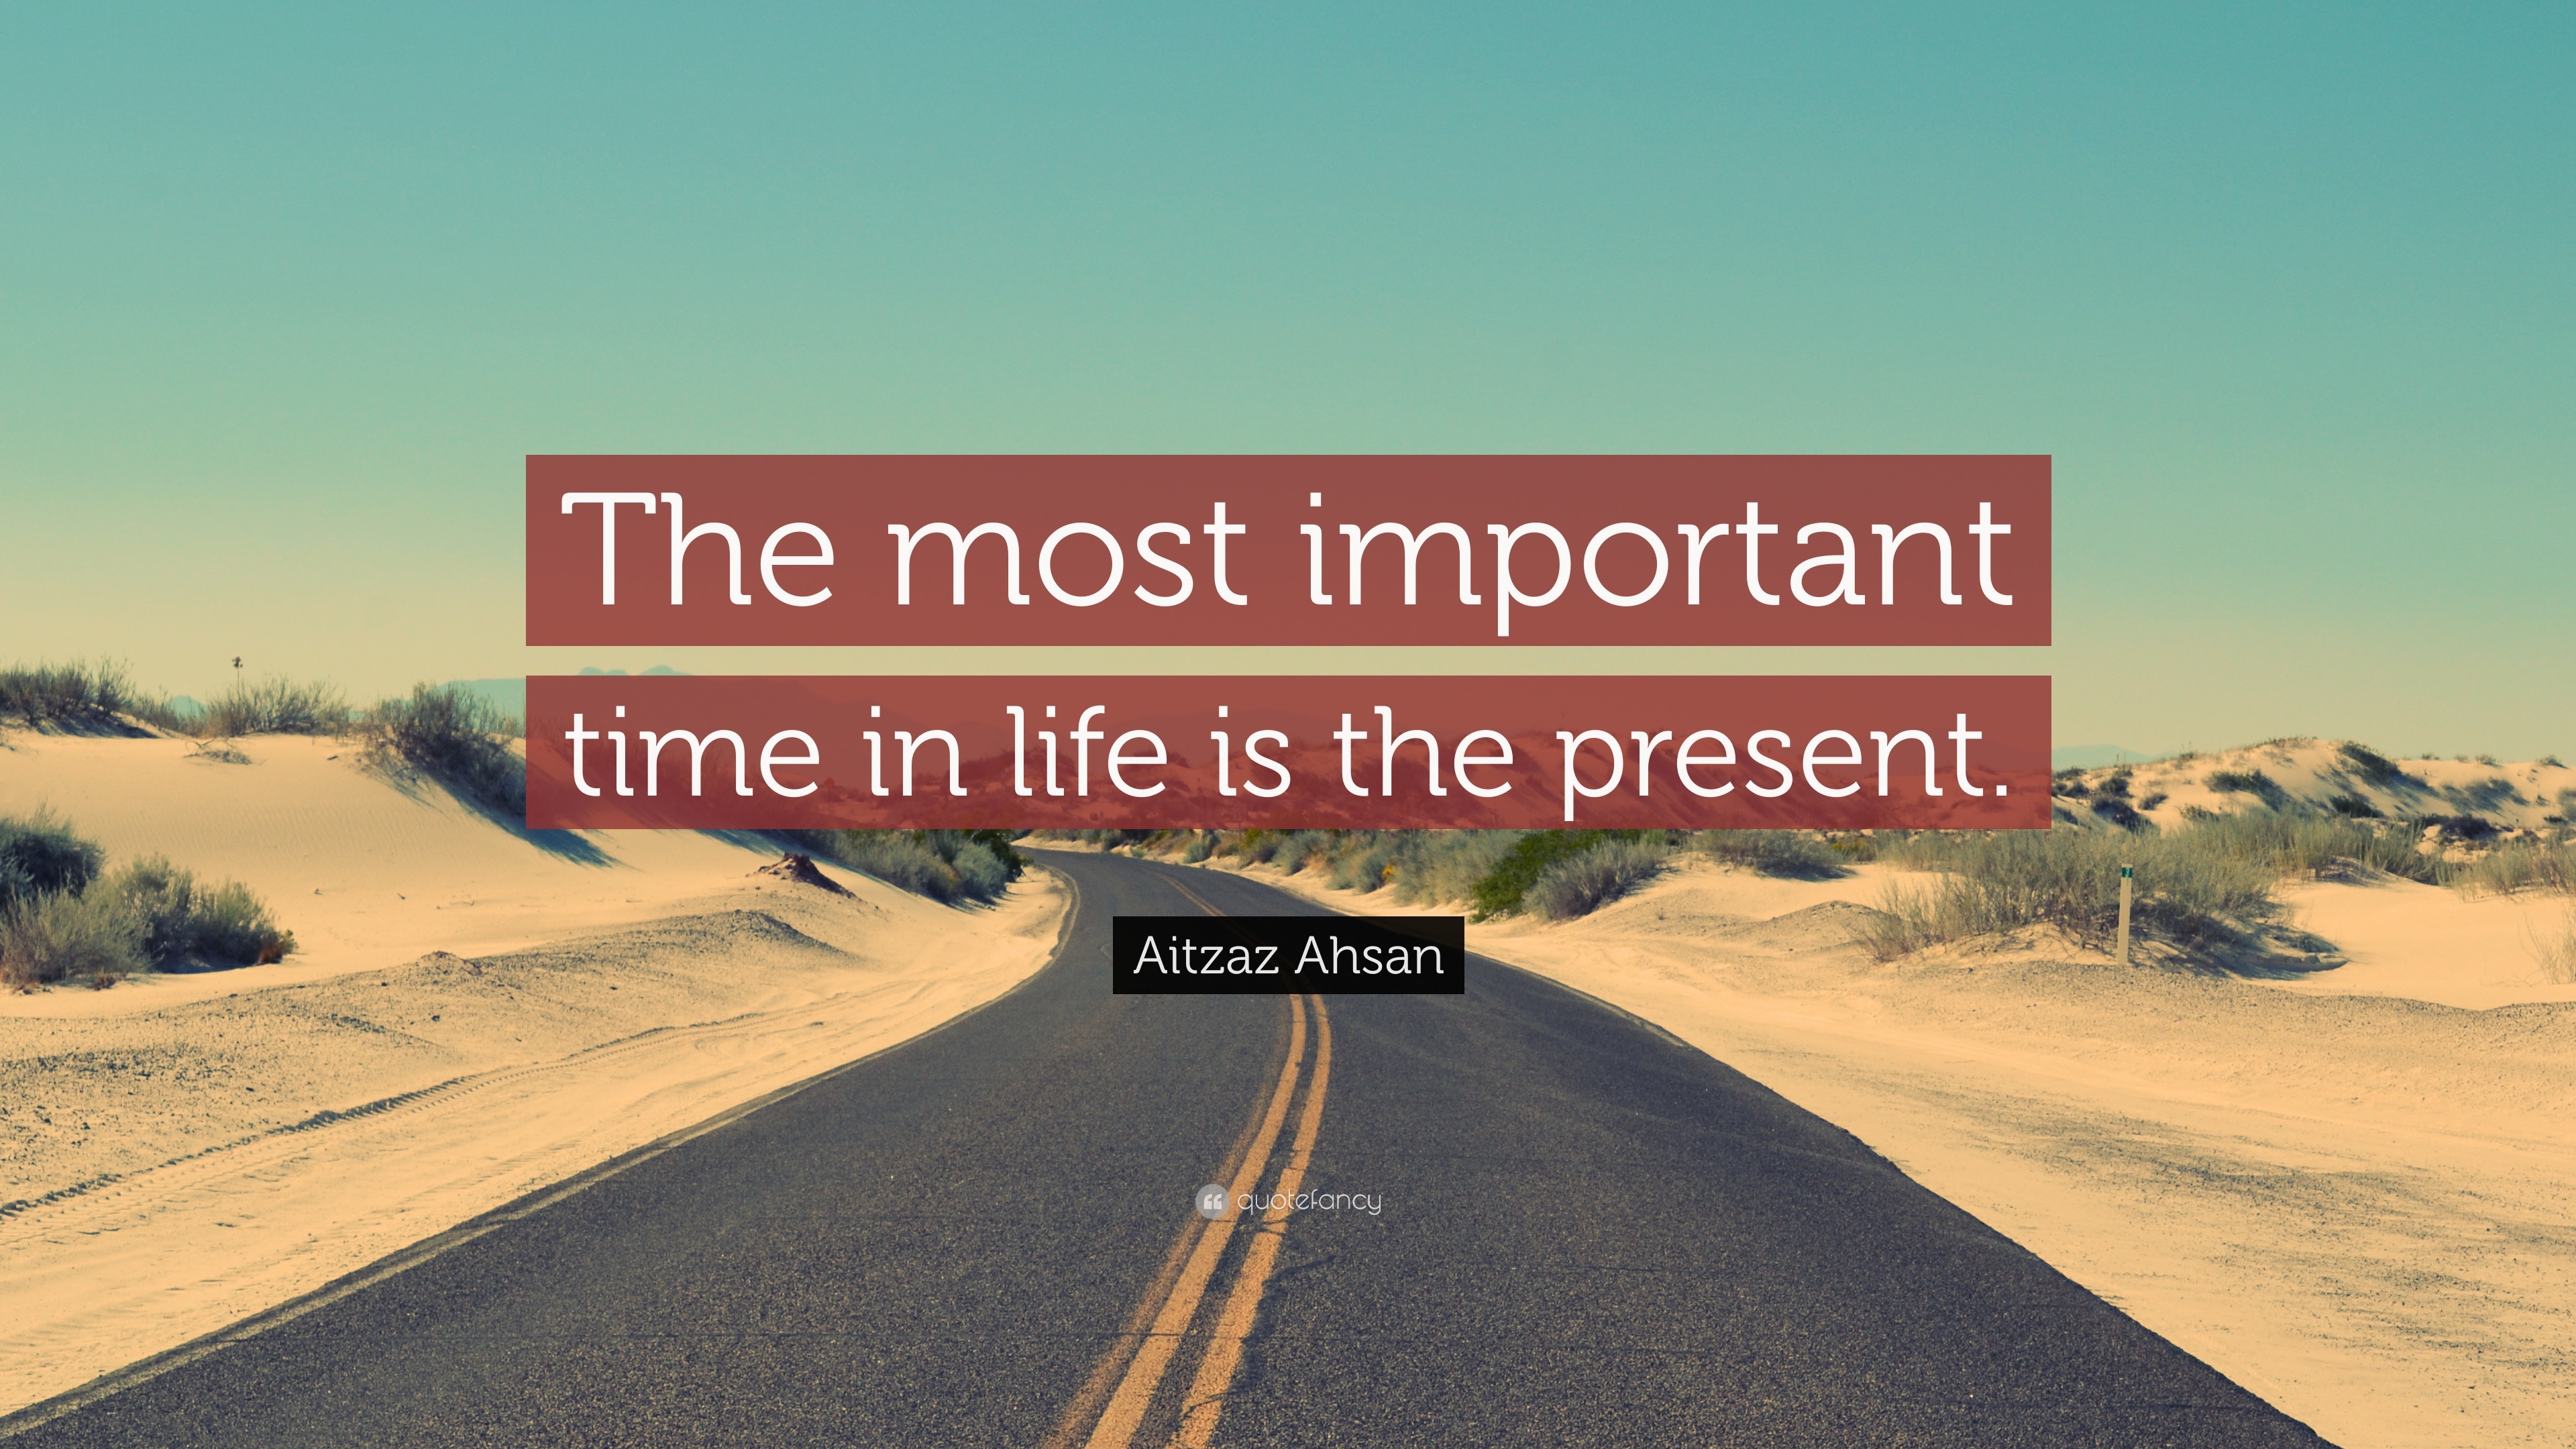 Aitzaz Ahsan “The most important in life is present.”